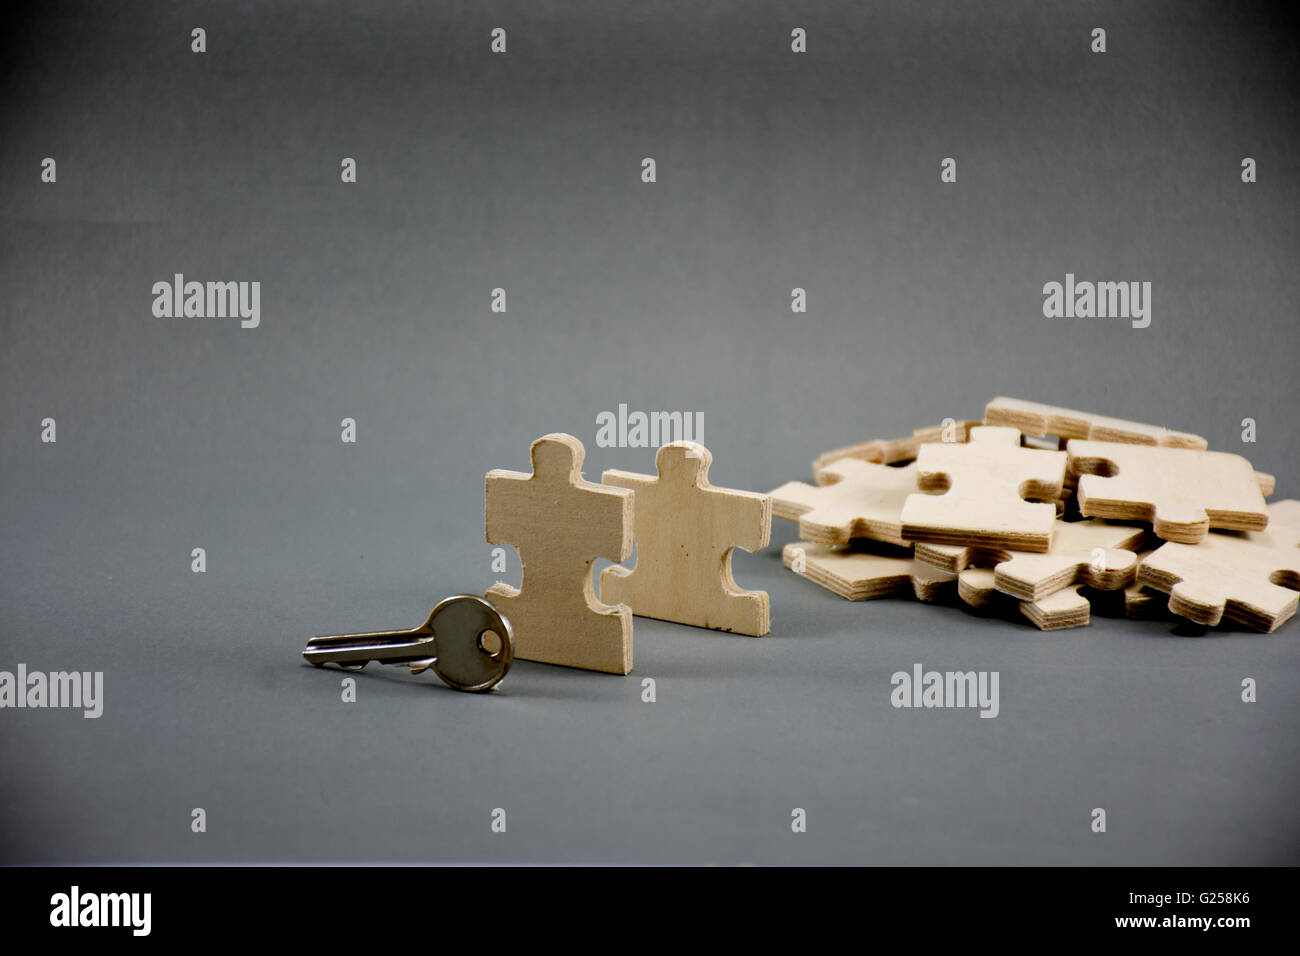 Puzzle made of wood with key.on gray.business idea,MLM,On gray background.Center Stock Photo